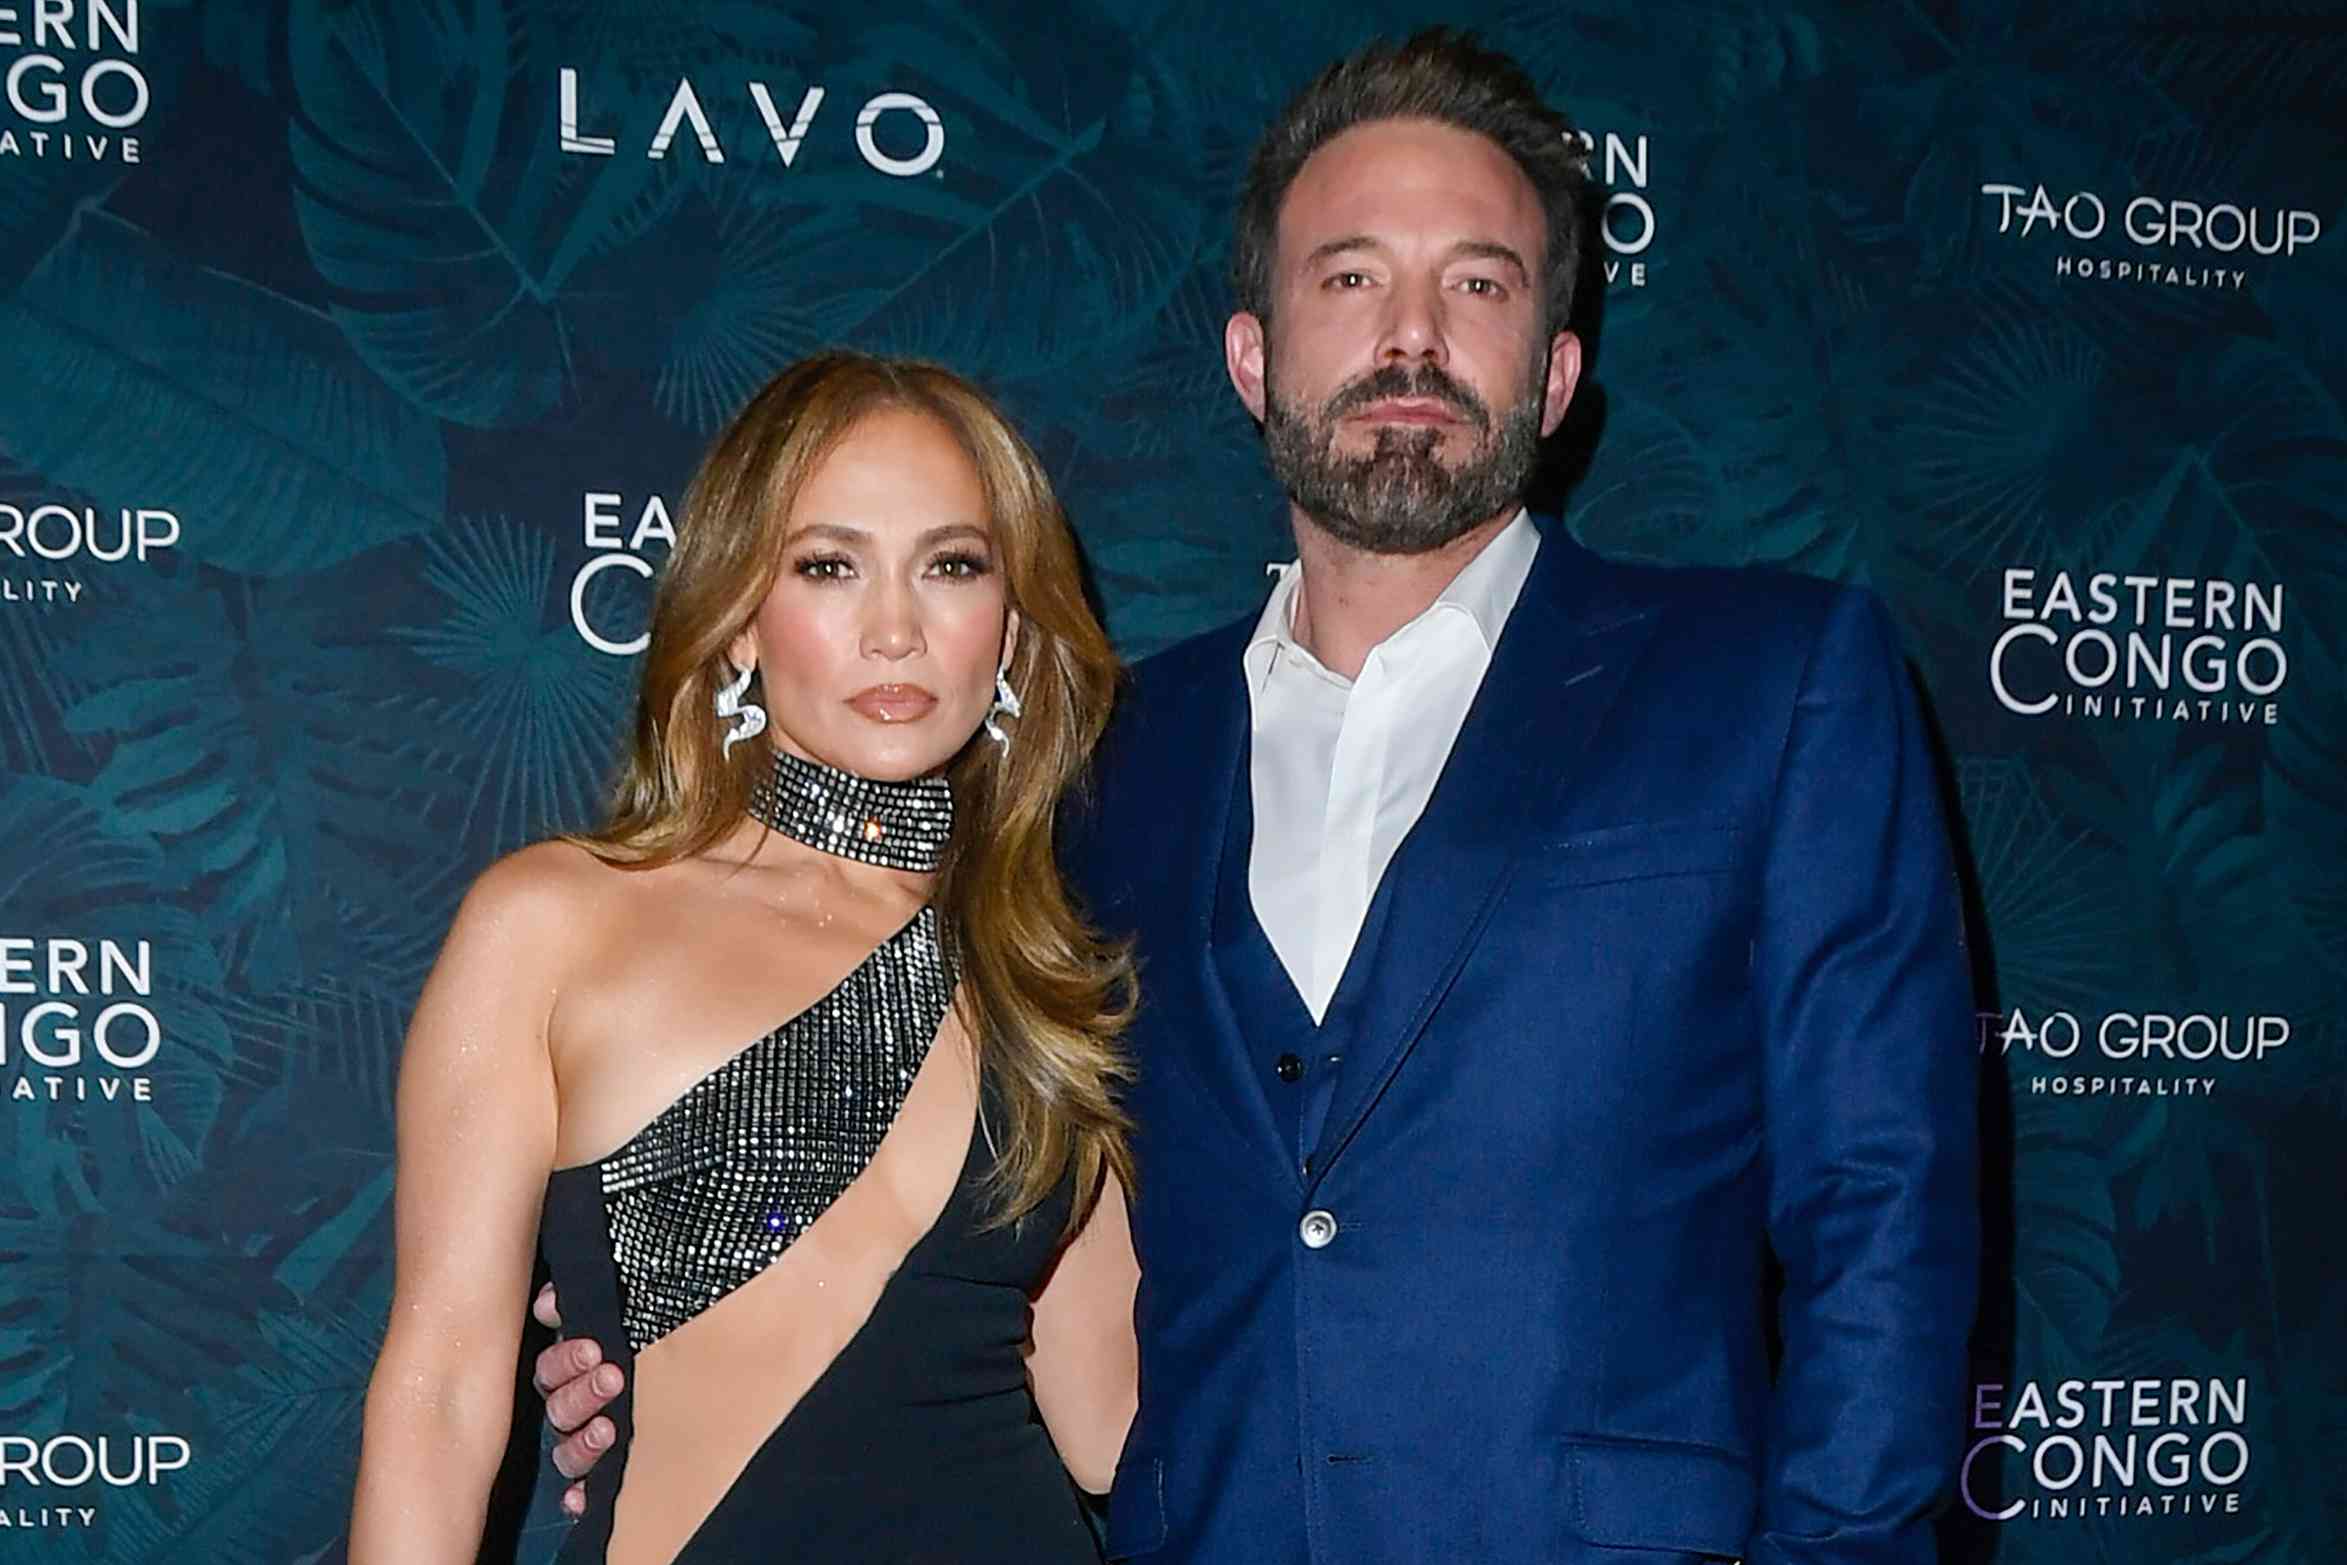 Jennifer Lopez Briefly Mentions Ben Affleck amid Marriage Rumors on “Jimmy Kimmel Live”